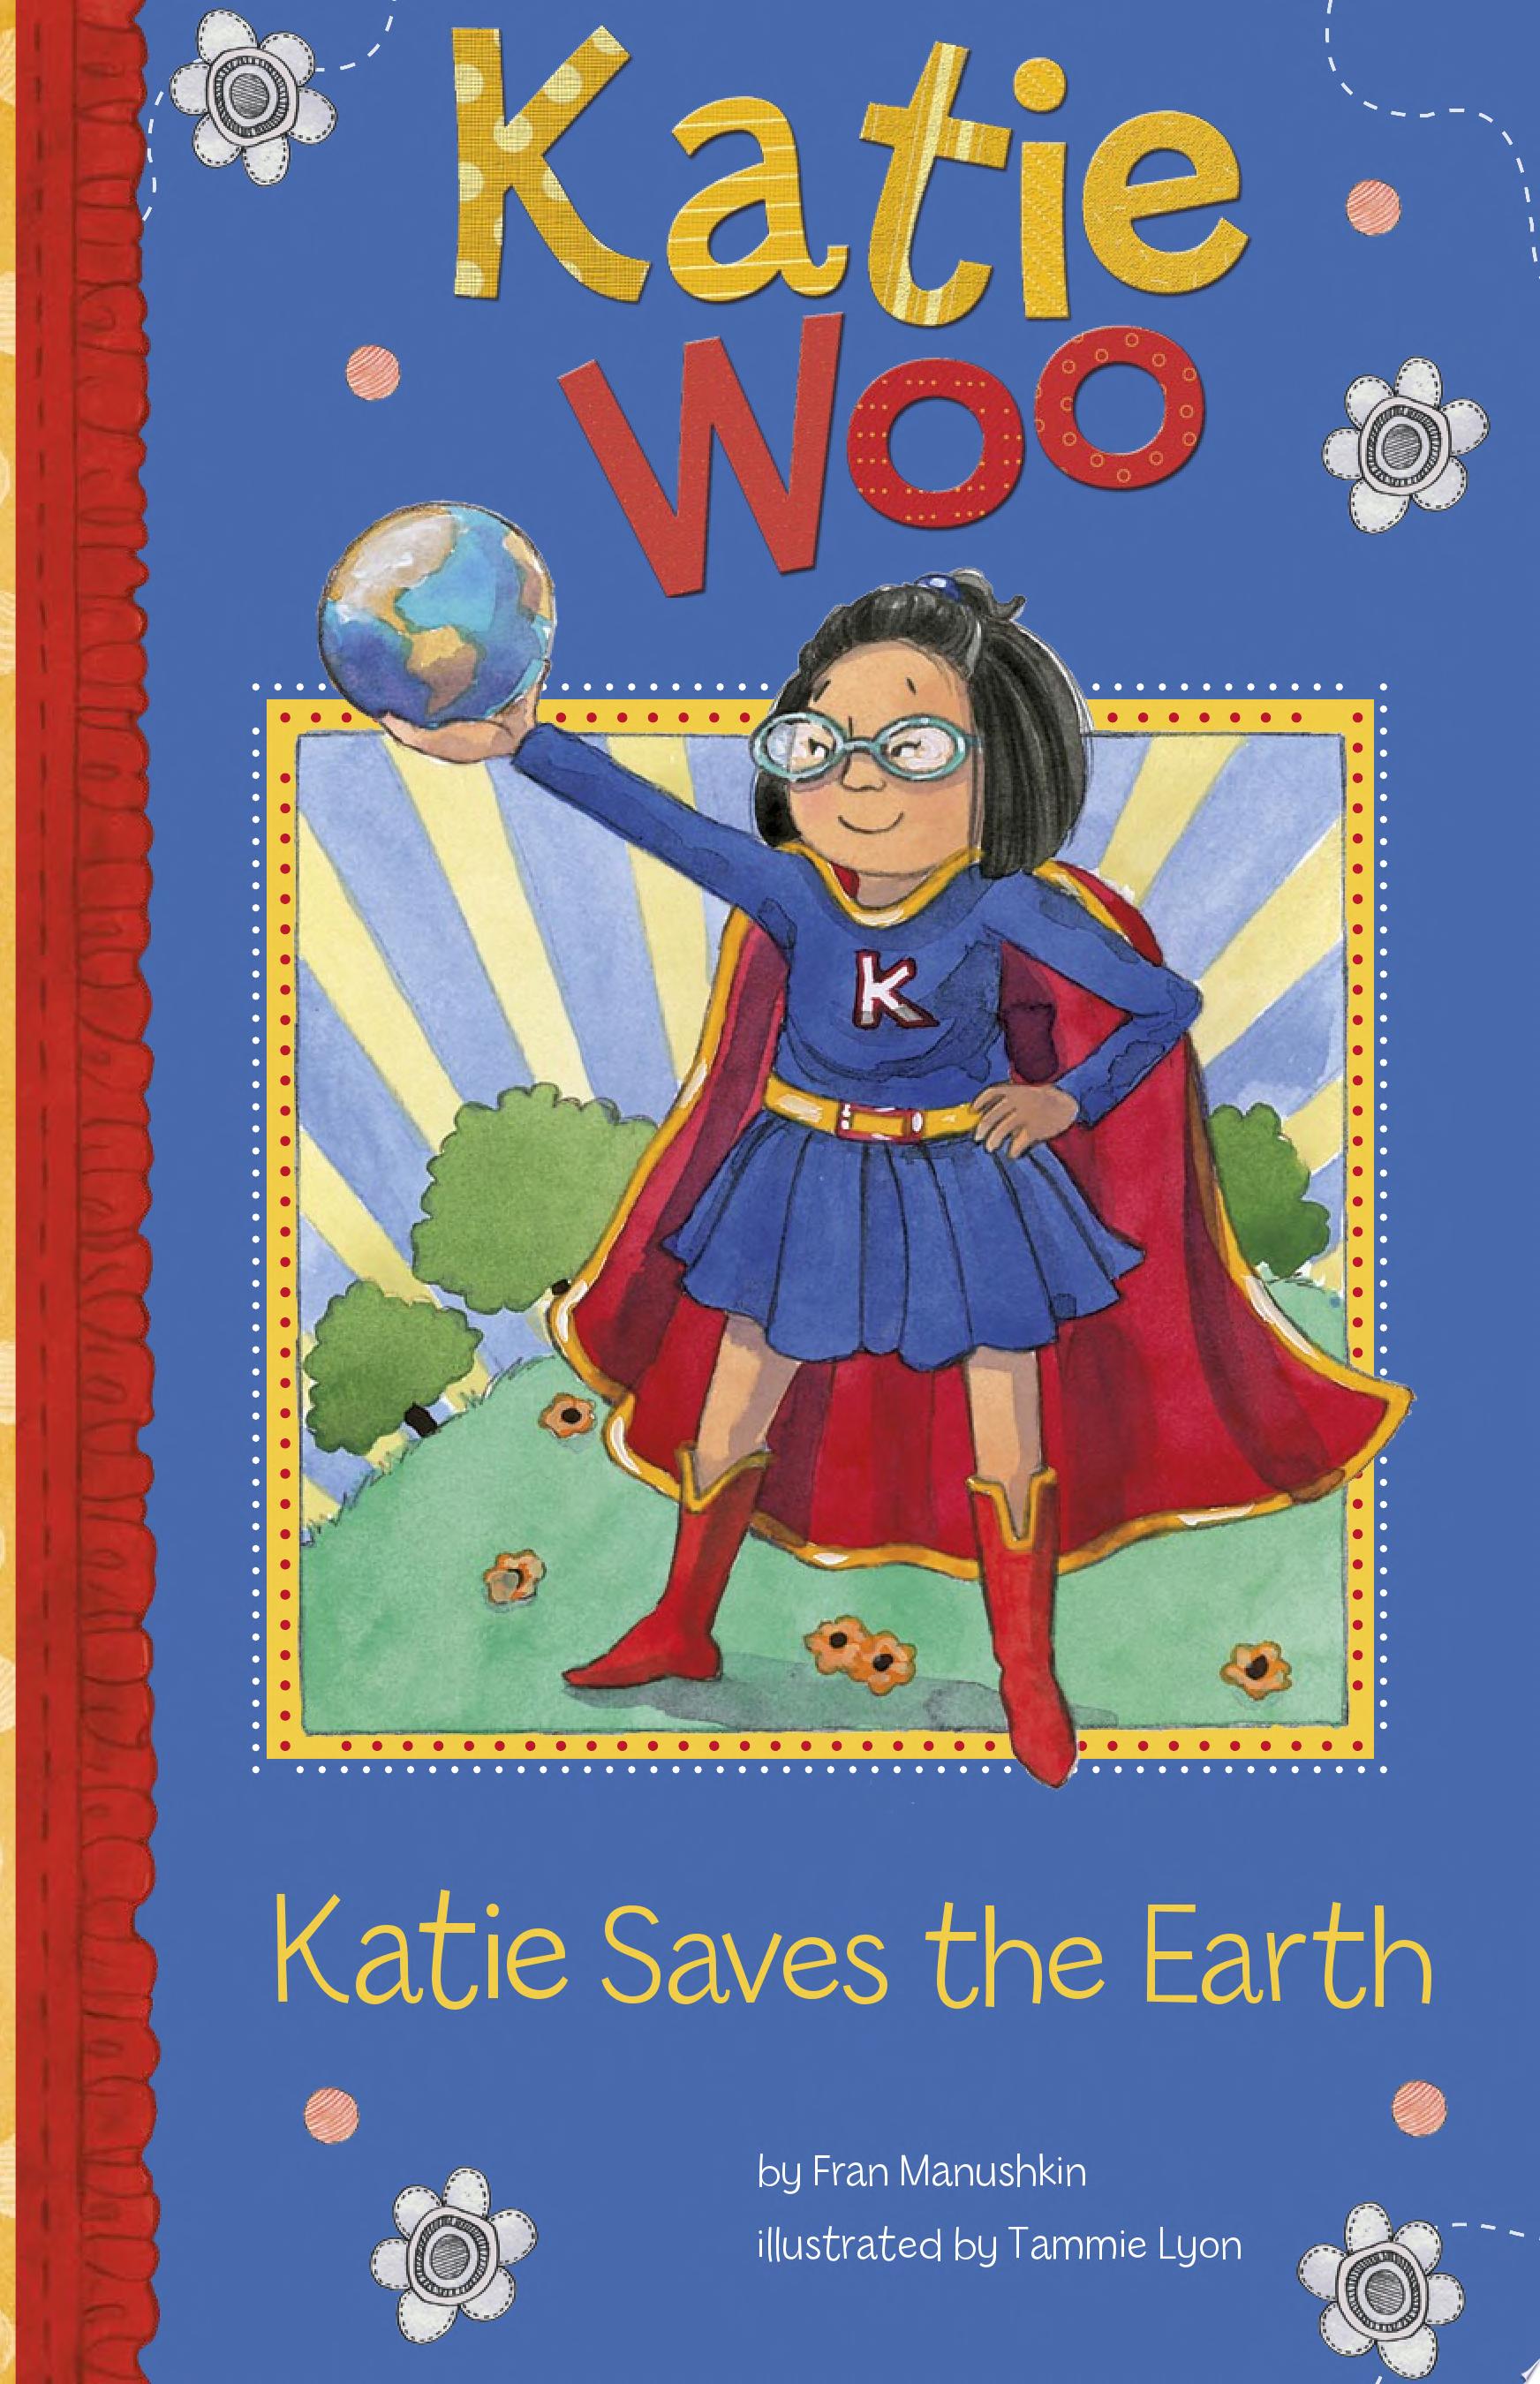 Image for "Katie Saves the Earth"